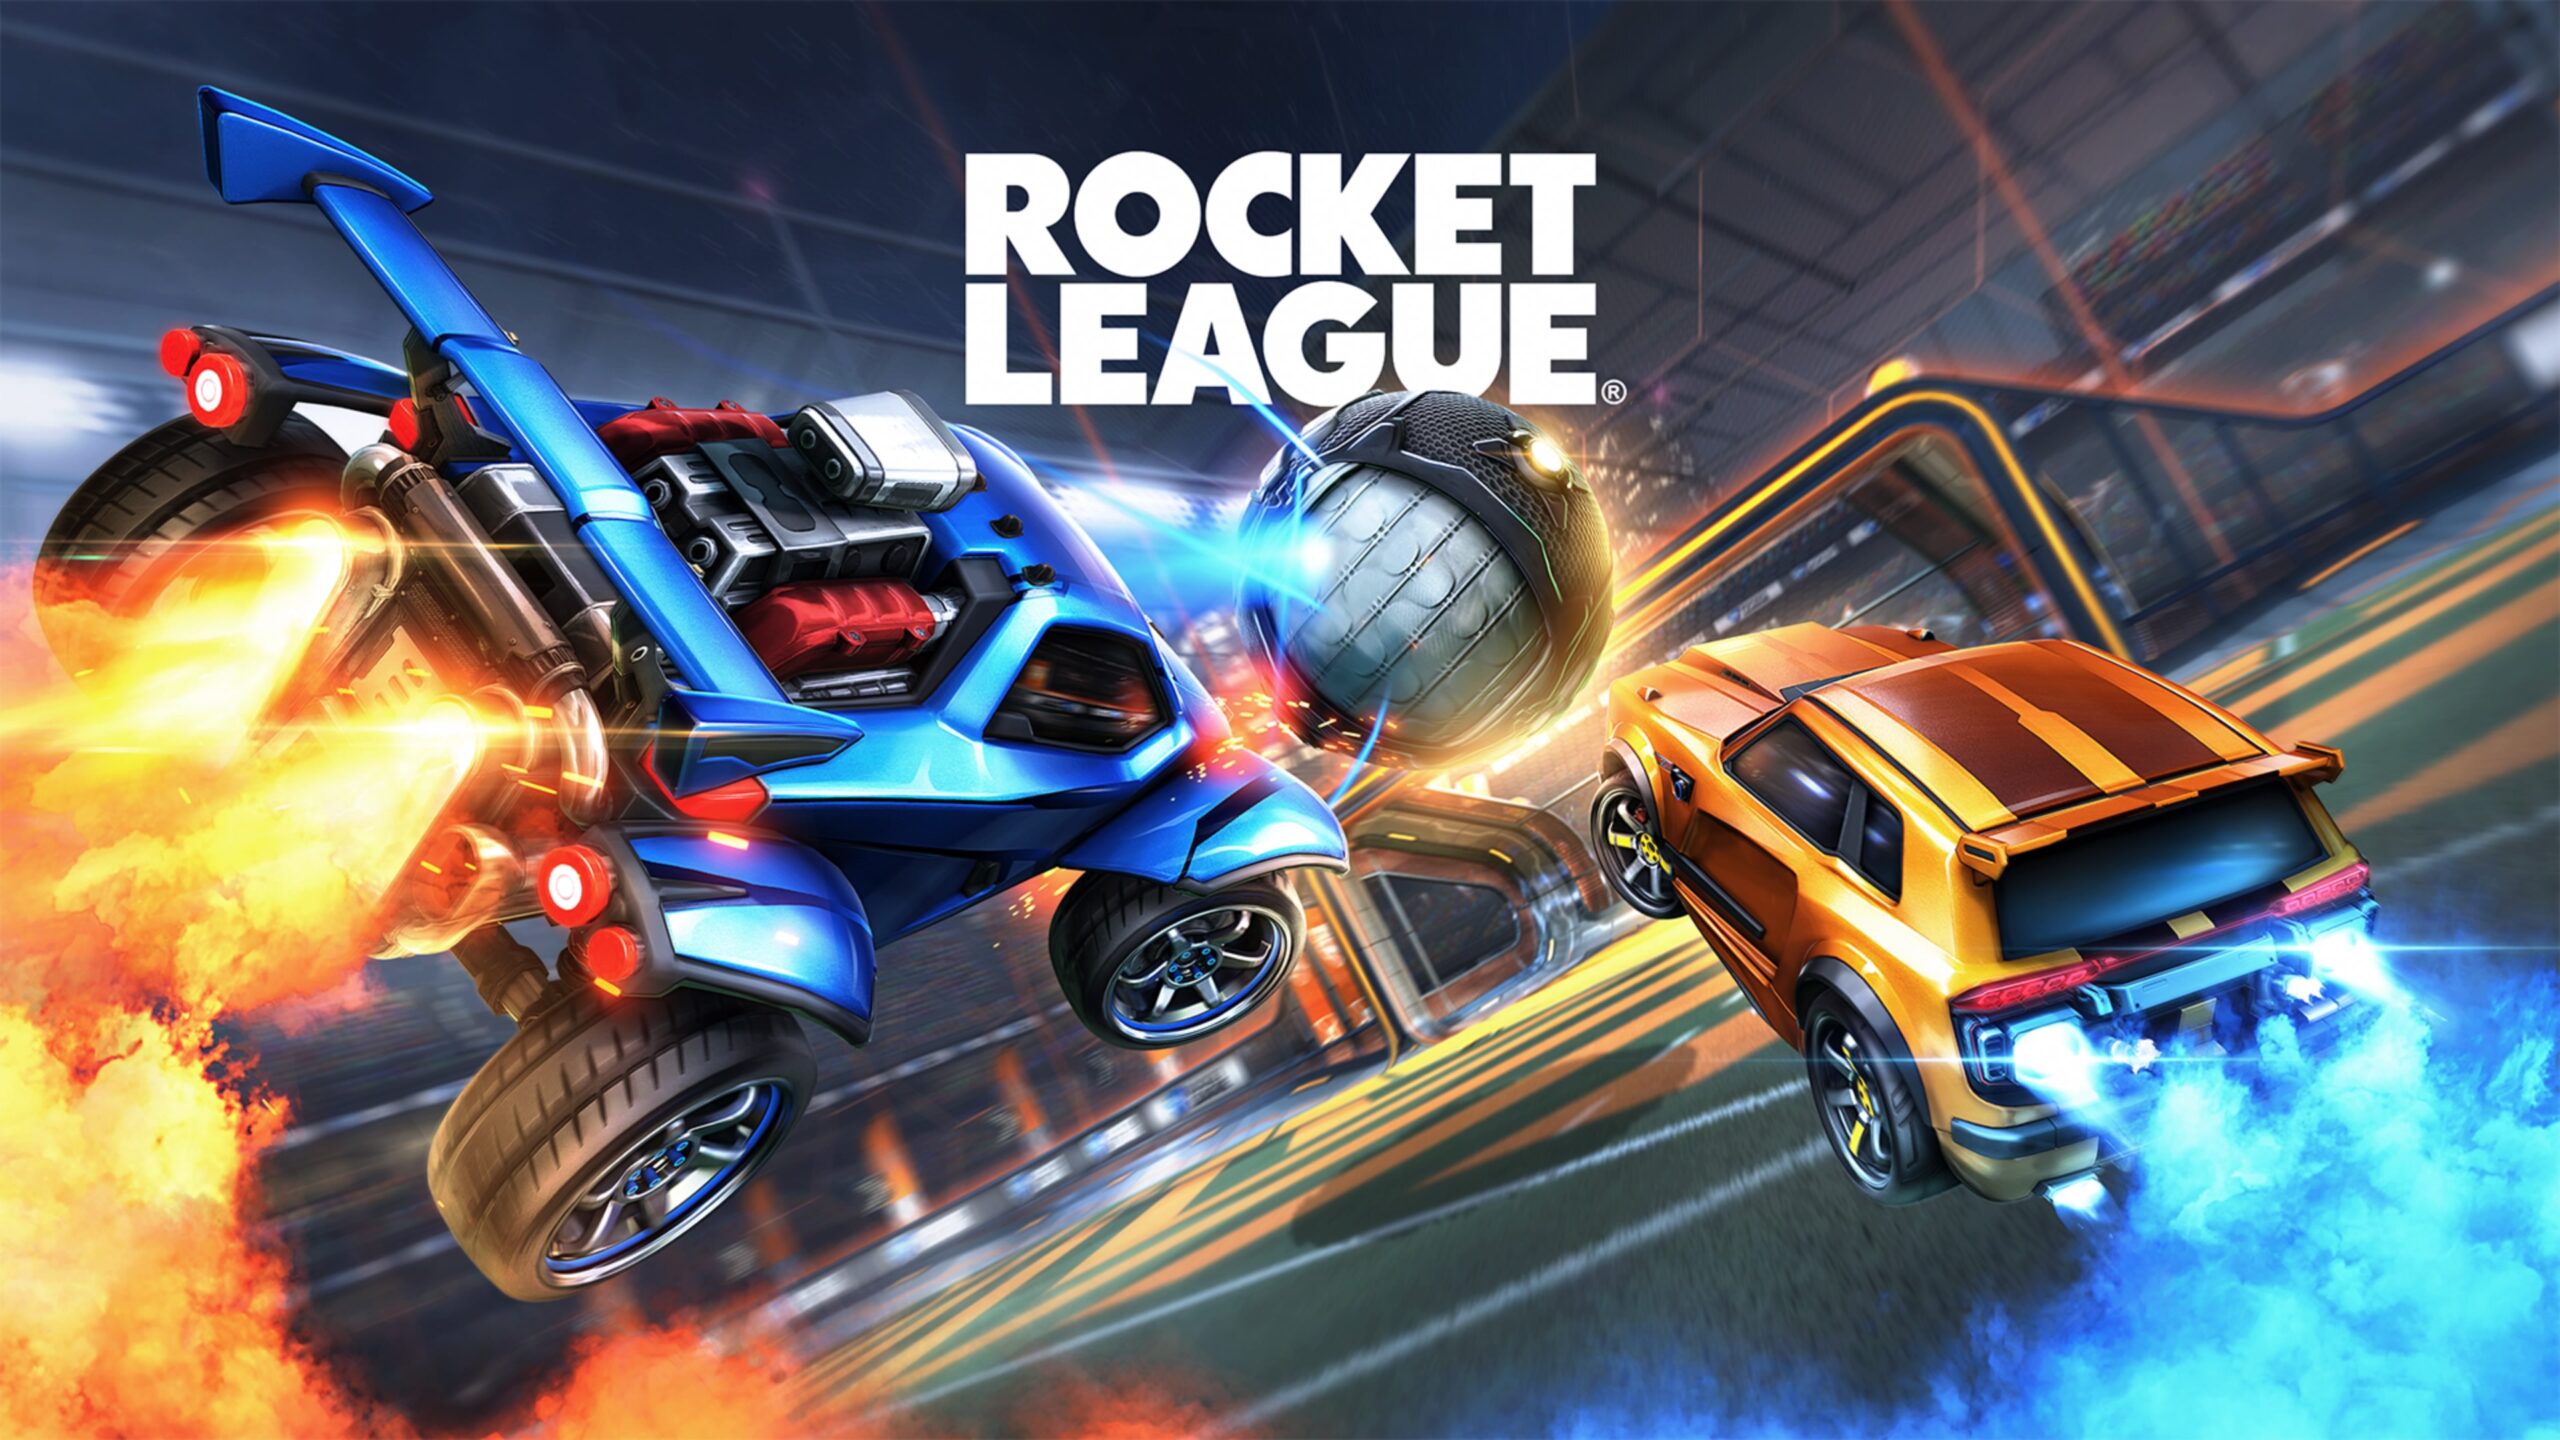 Rocket League Tournaments Are Now Live on Repeat